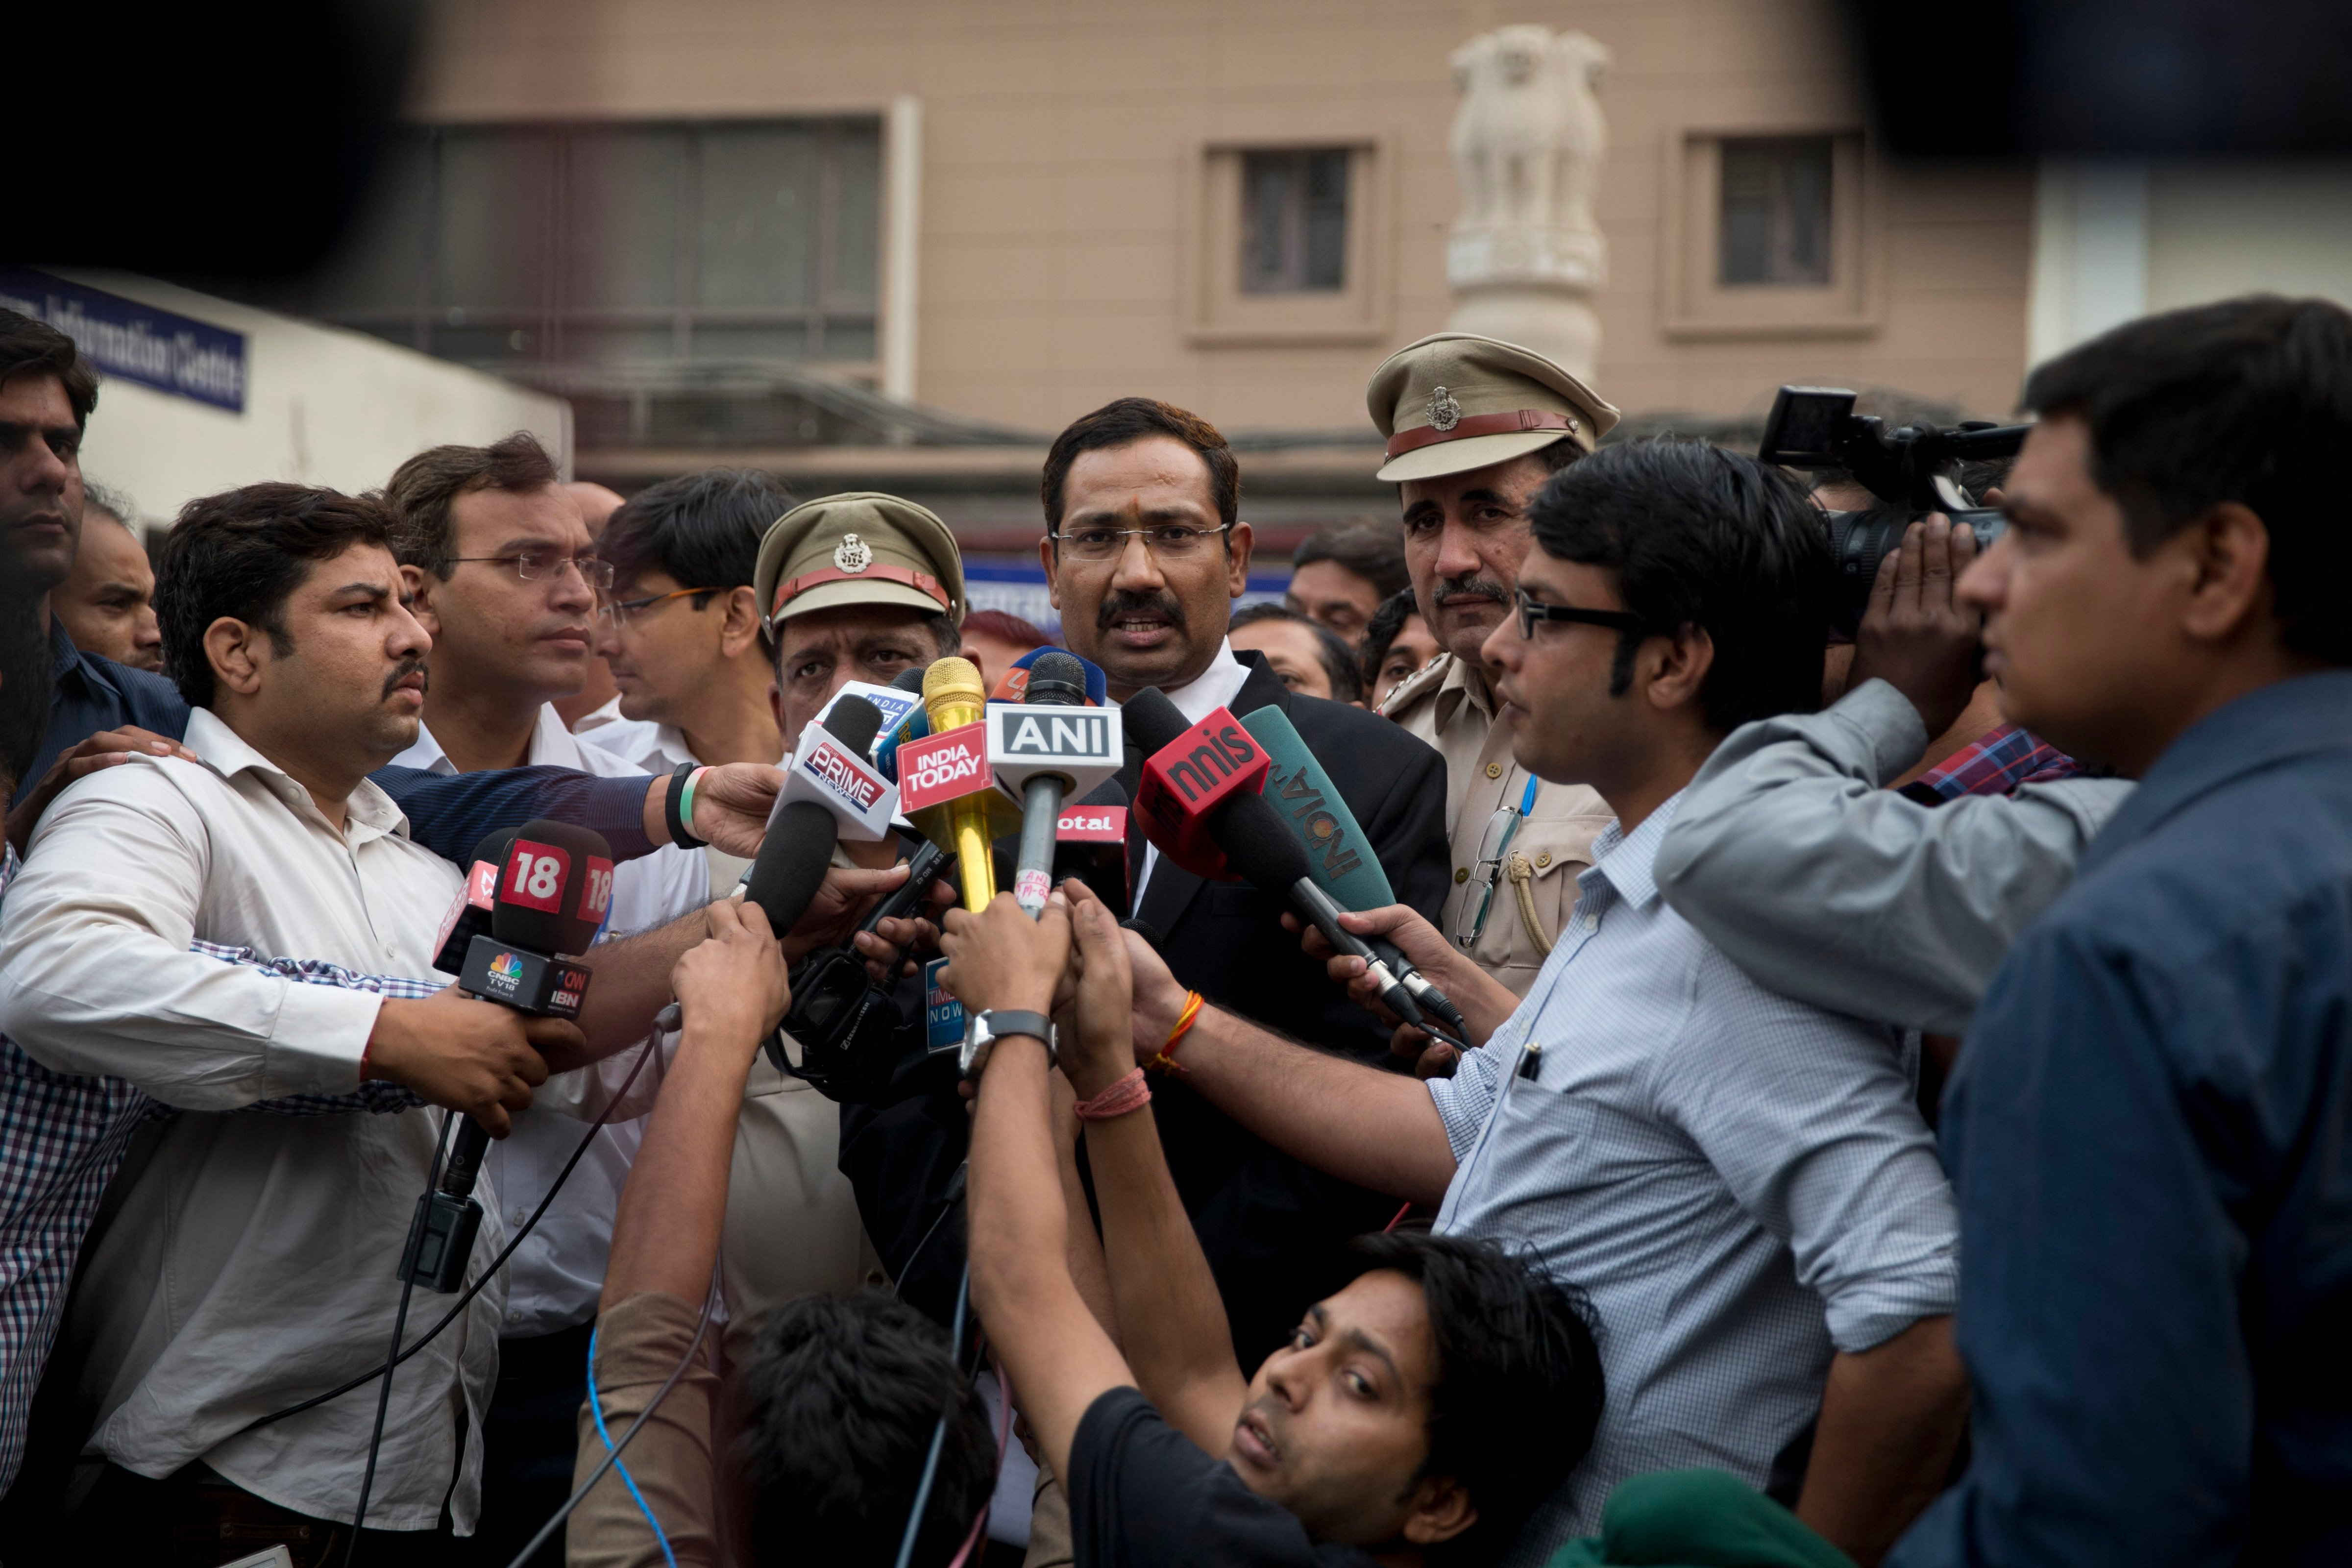 A lawyer, center, speaks to reporters at the Tis Hazari Courts premises, after a court sentence for Uber driver Shiv Kumar Yadav in New Delhi on Tuesday, Nov. 3, 2015. An Indian court sentenced Uber driver Yadav to life in prison Tuesday for raping a passenger in his vehicle last December. (Tsering Topgyal—AP)